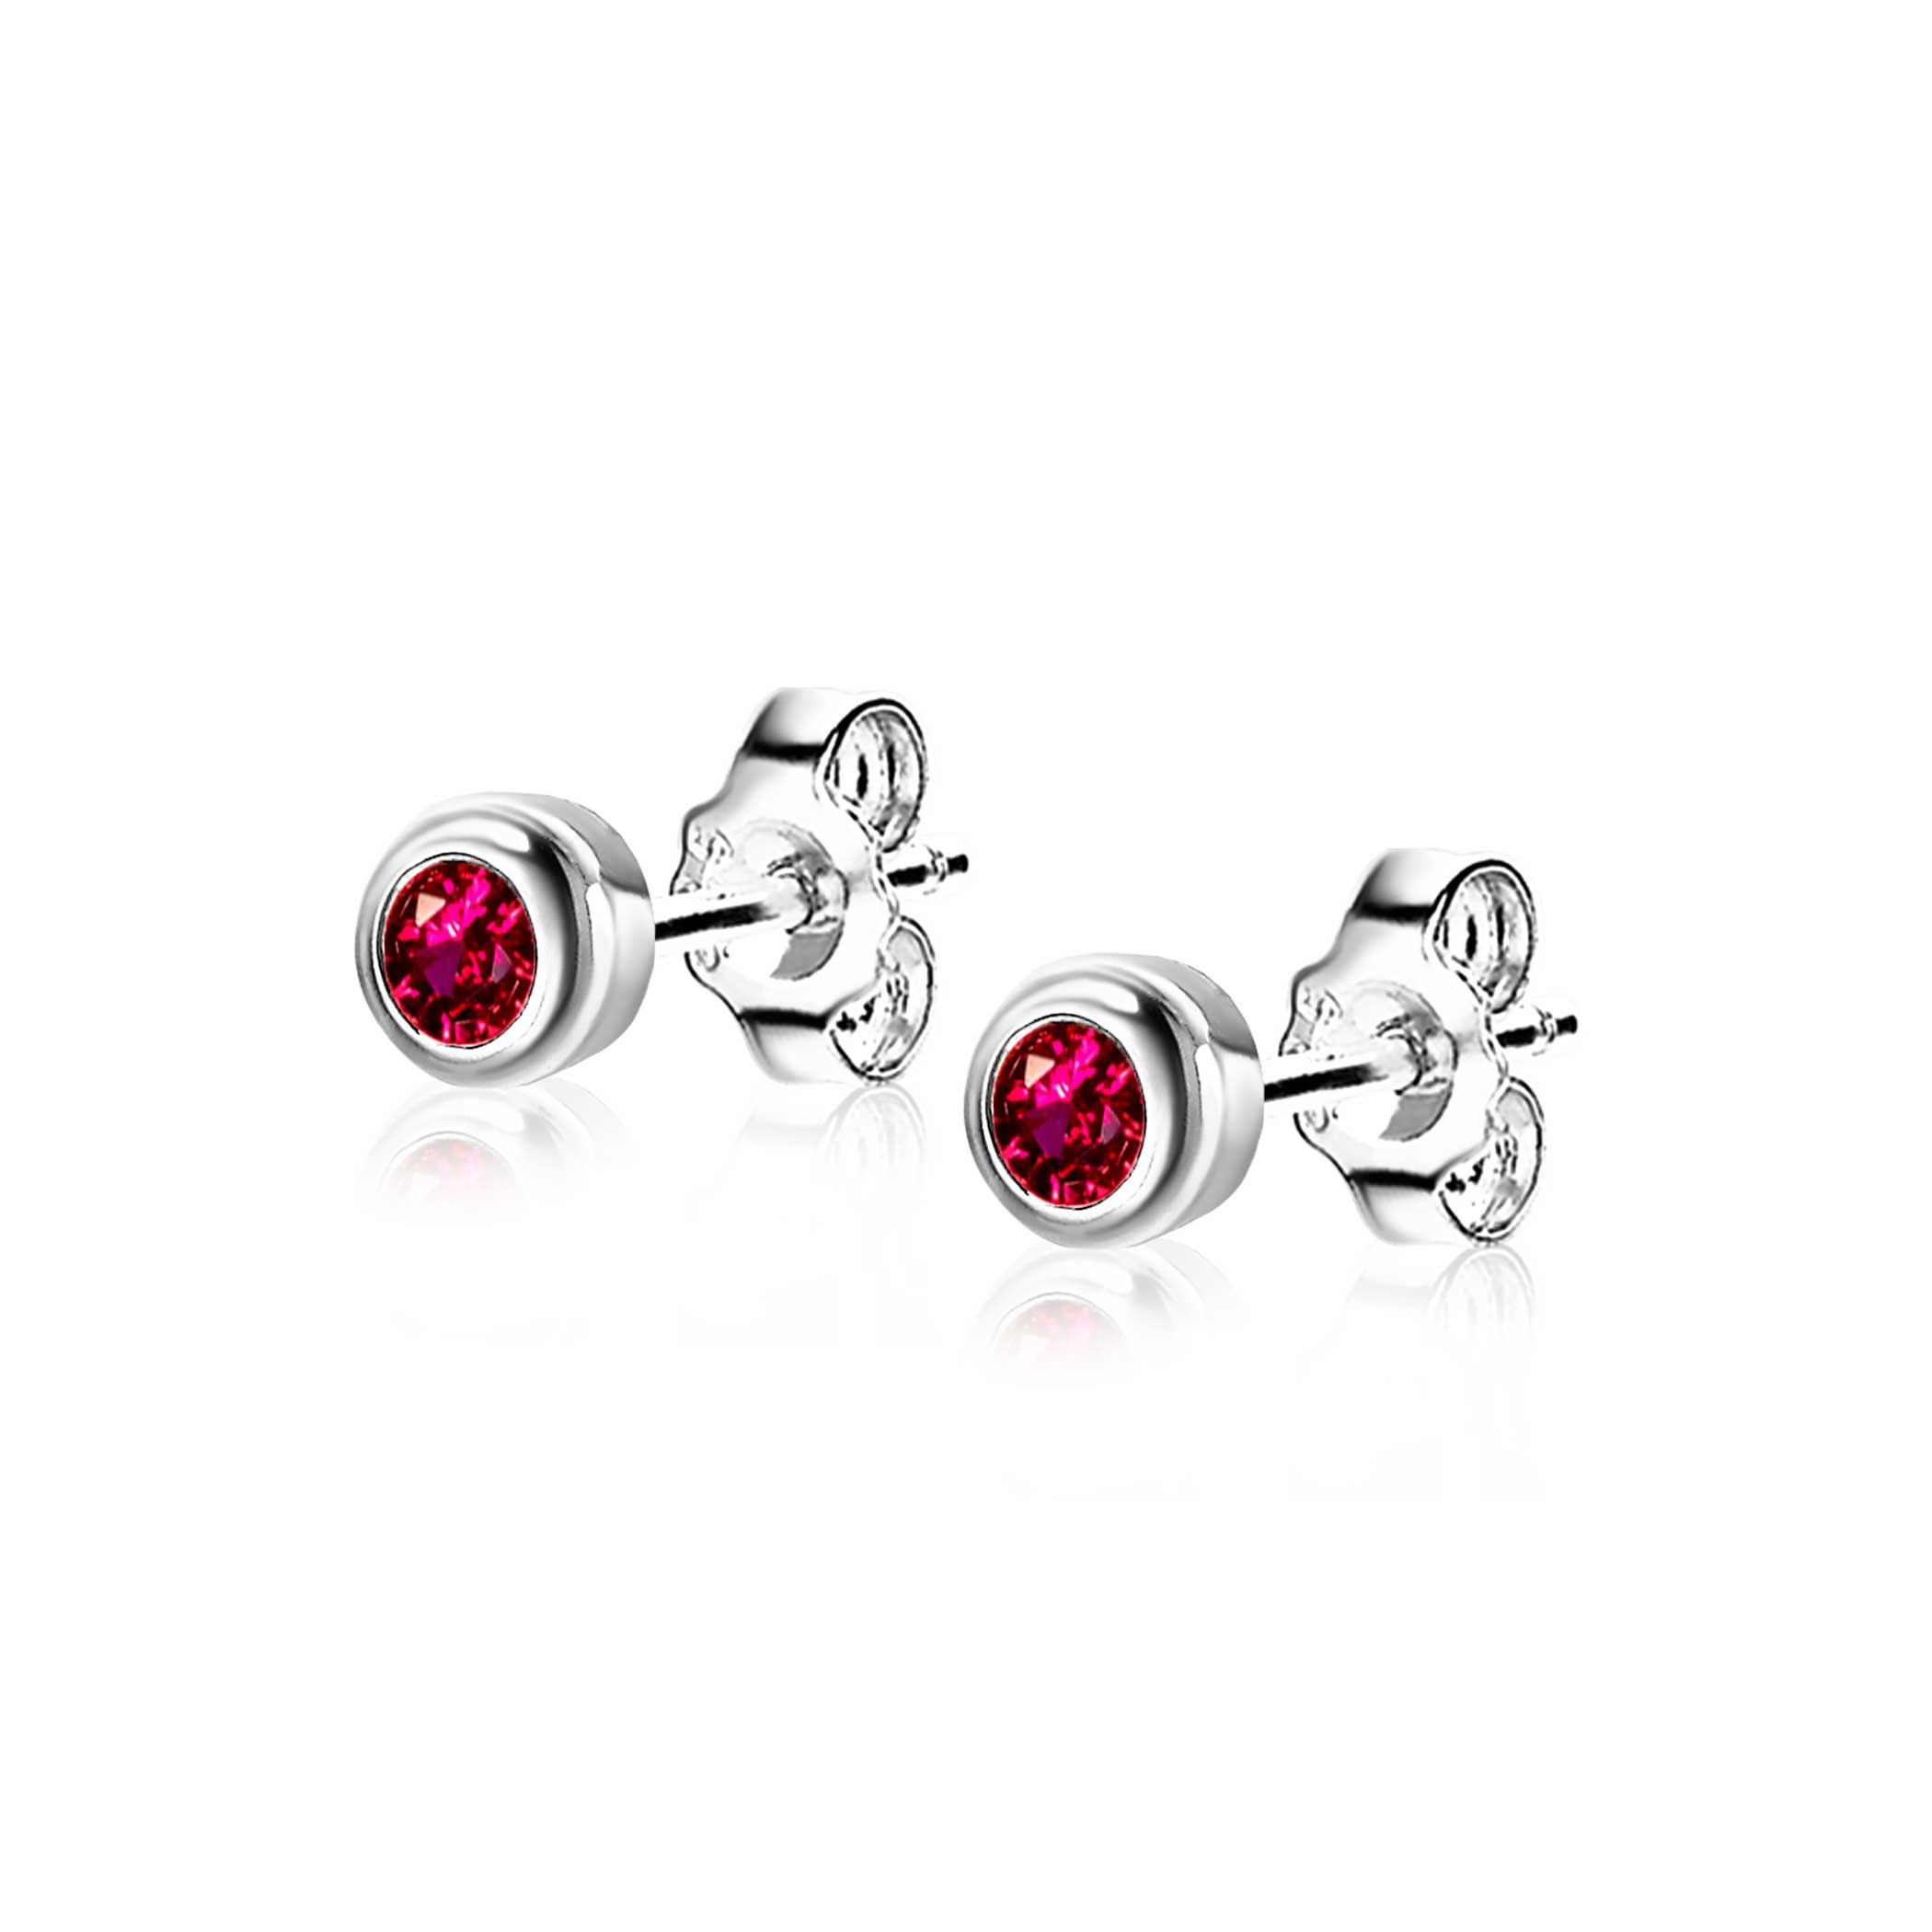 JULY Stud Earrings 4mm Sterling Silver with Birthstone Red Ruby Zirconia